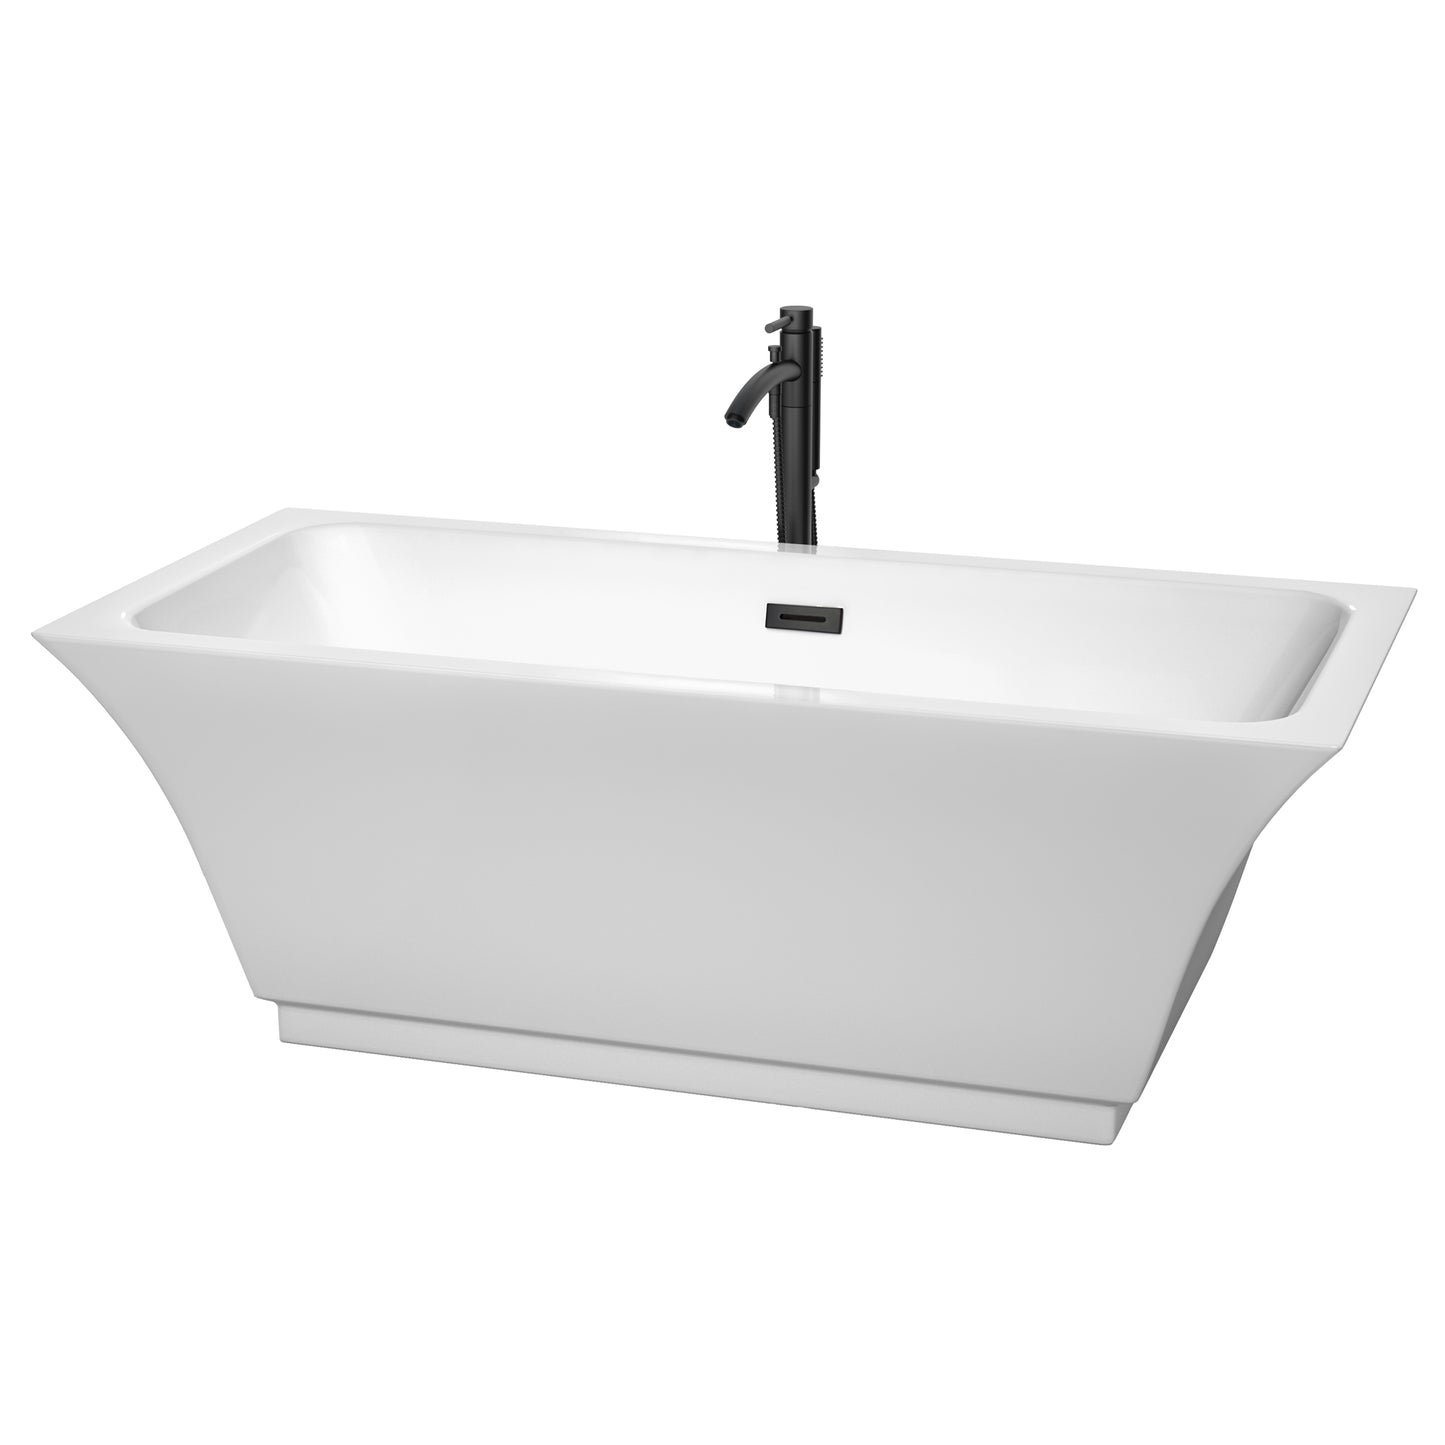 Wyndham Collection Galina 67 Inch Freestanding Bathtub in White with Floor Mounted Faucet, Drain and Overflow Trim in Matte Black - Luxe Bathroom Vanities